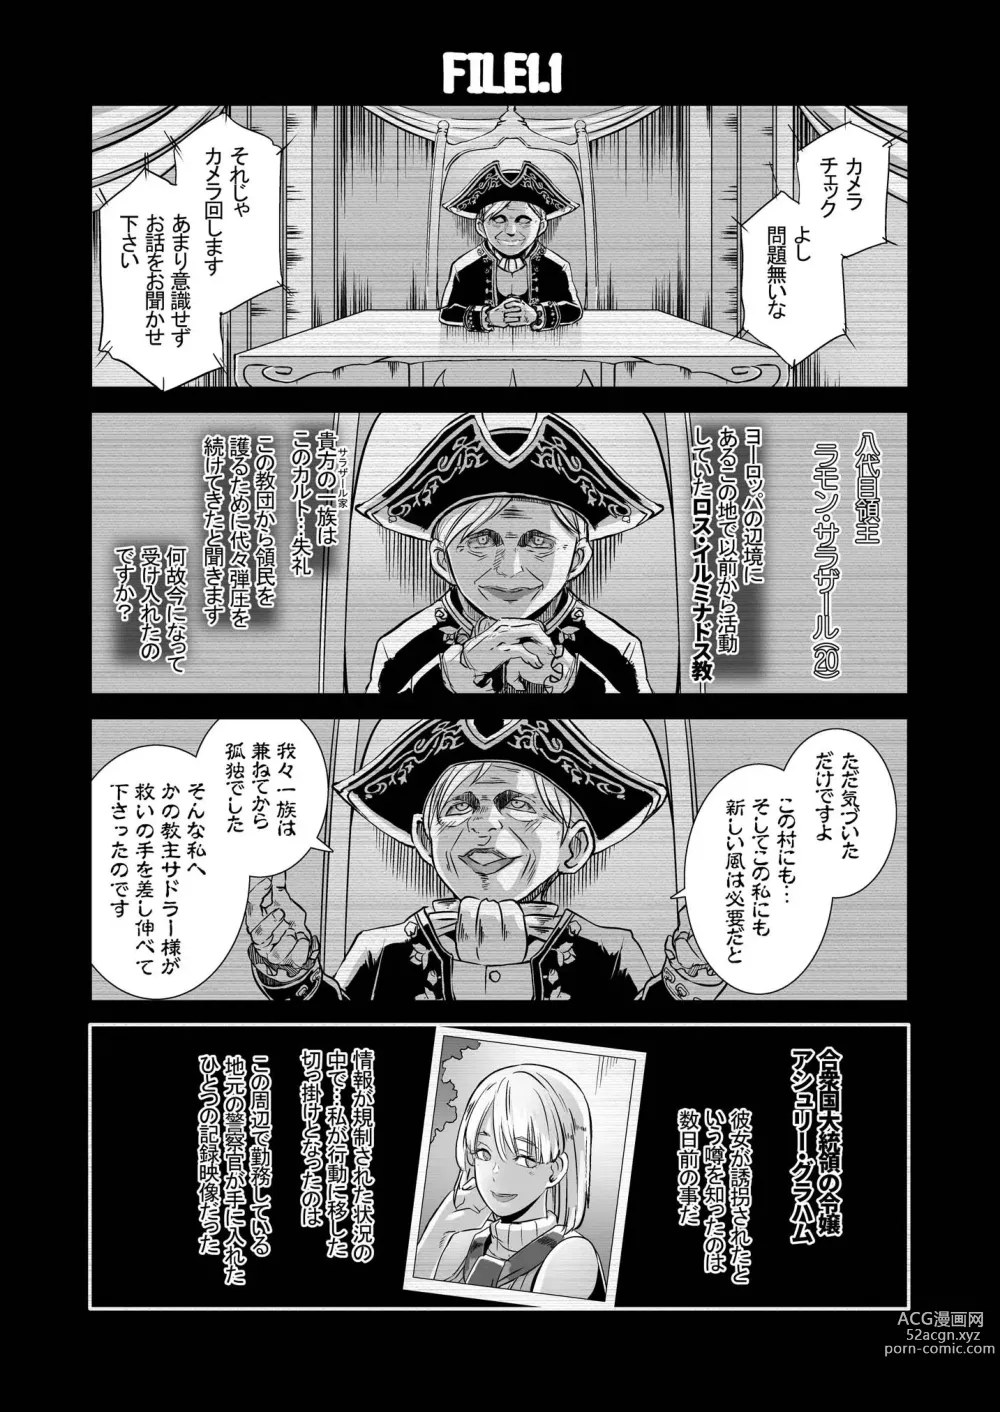 Page 5 of doujinshi GAMEOVERS-FILE1.1+2.0 (decensored)